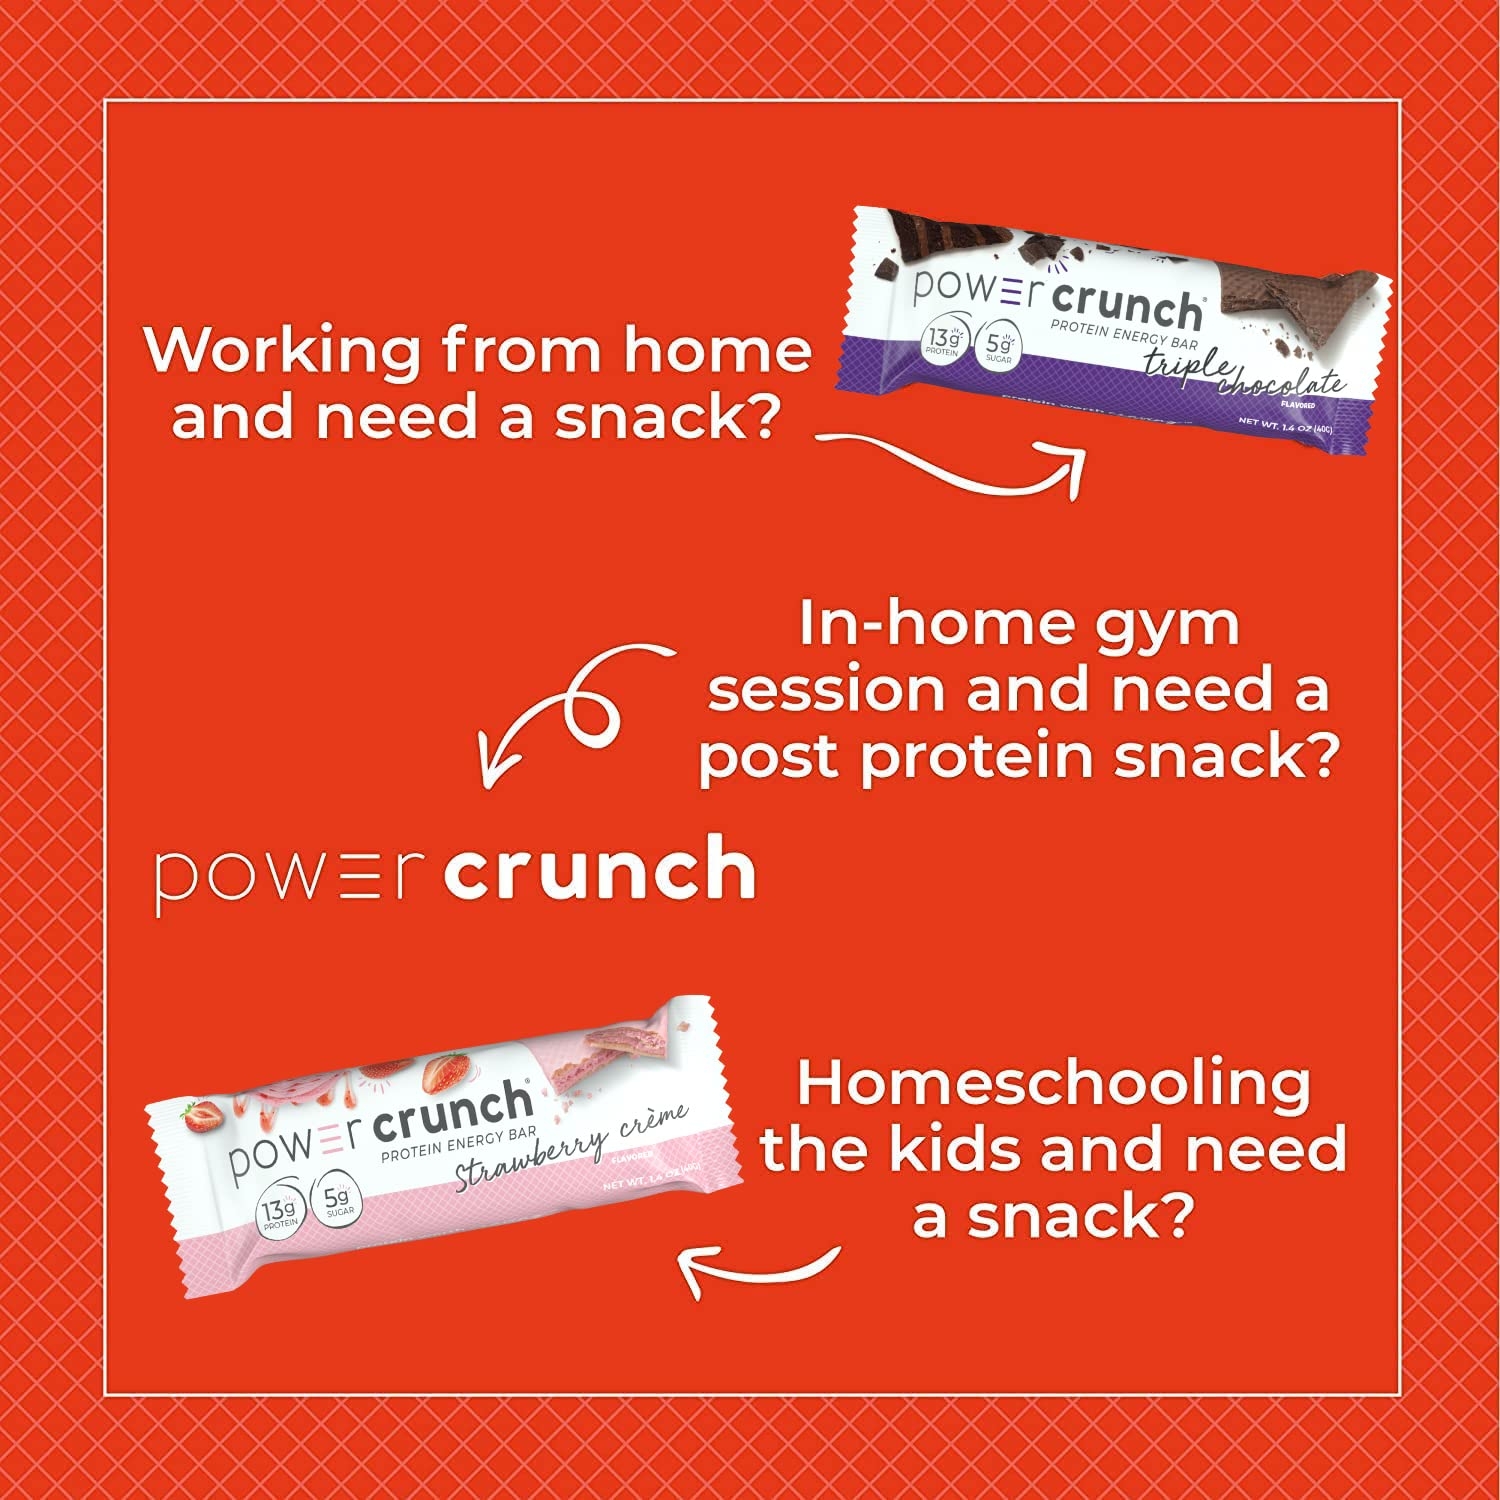 Power Crunch Whey Protein Bars, High Protein Snacks with Delicious Taste, Cookies and Crème, 1.4 Ounce (12 Count)